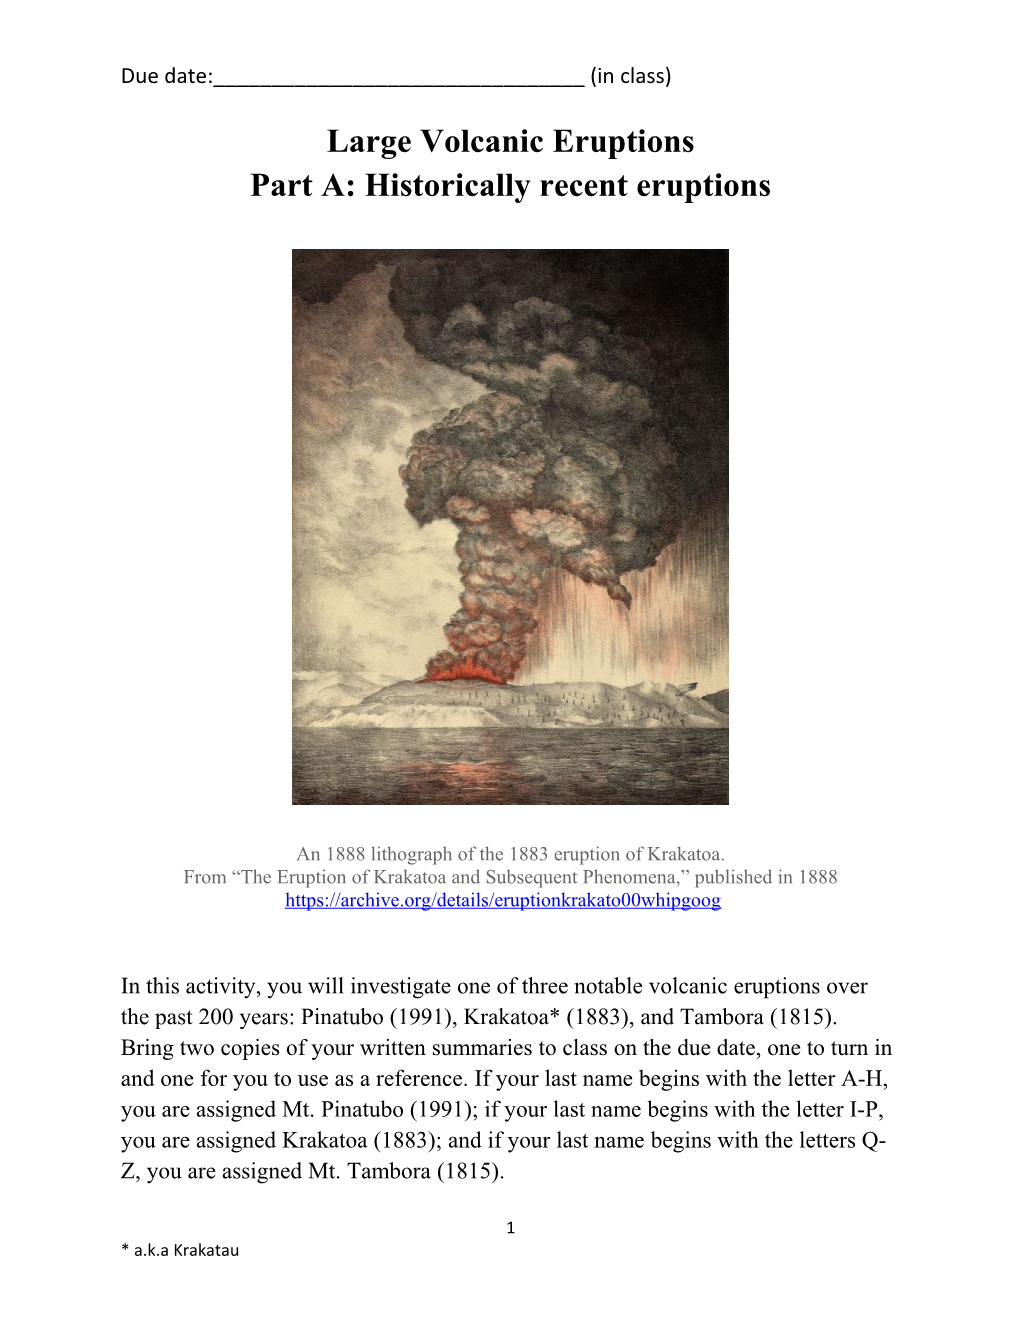 Large Volcanic Eruptions Part A:Historically Recent Eruptions